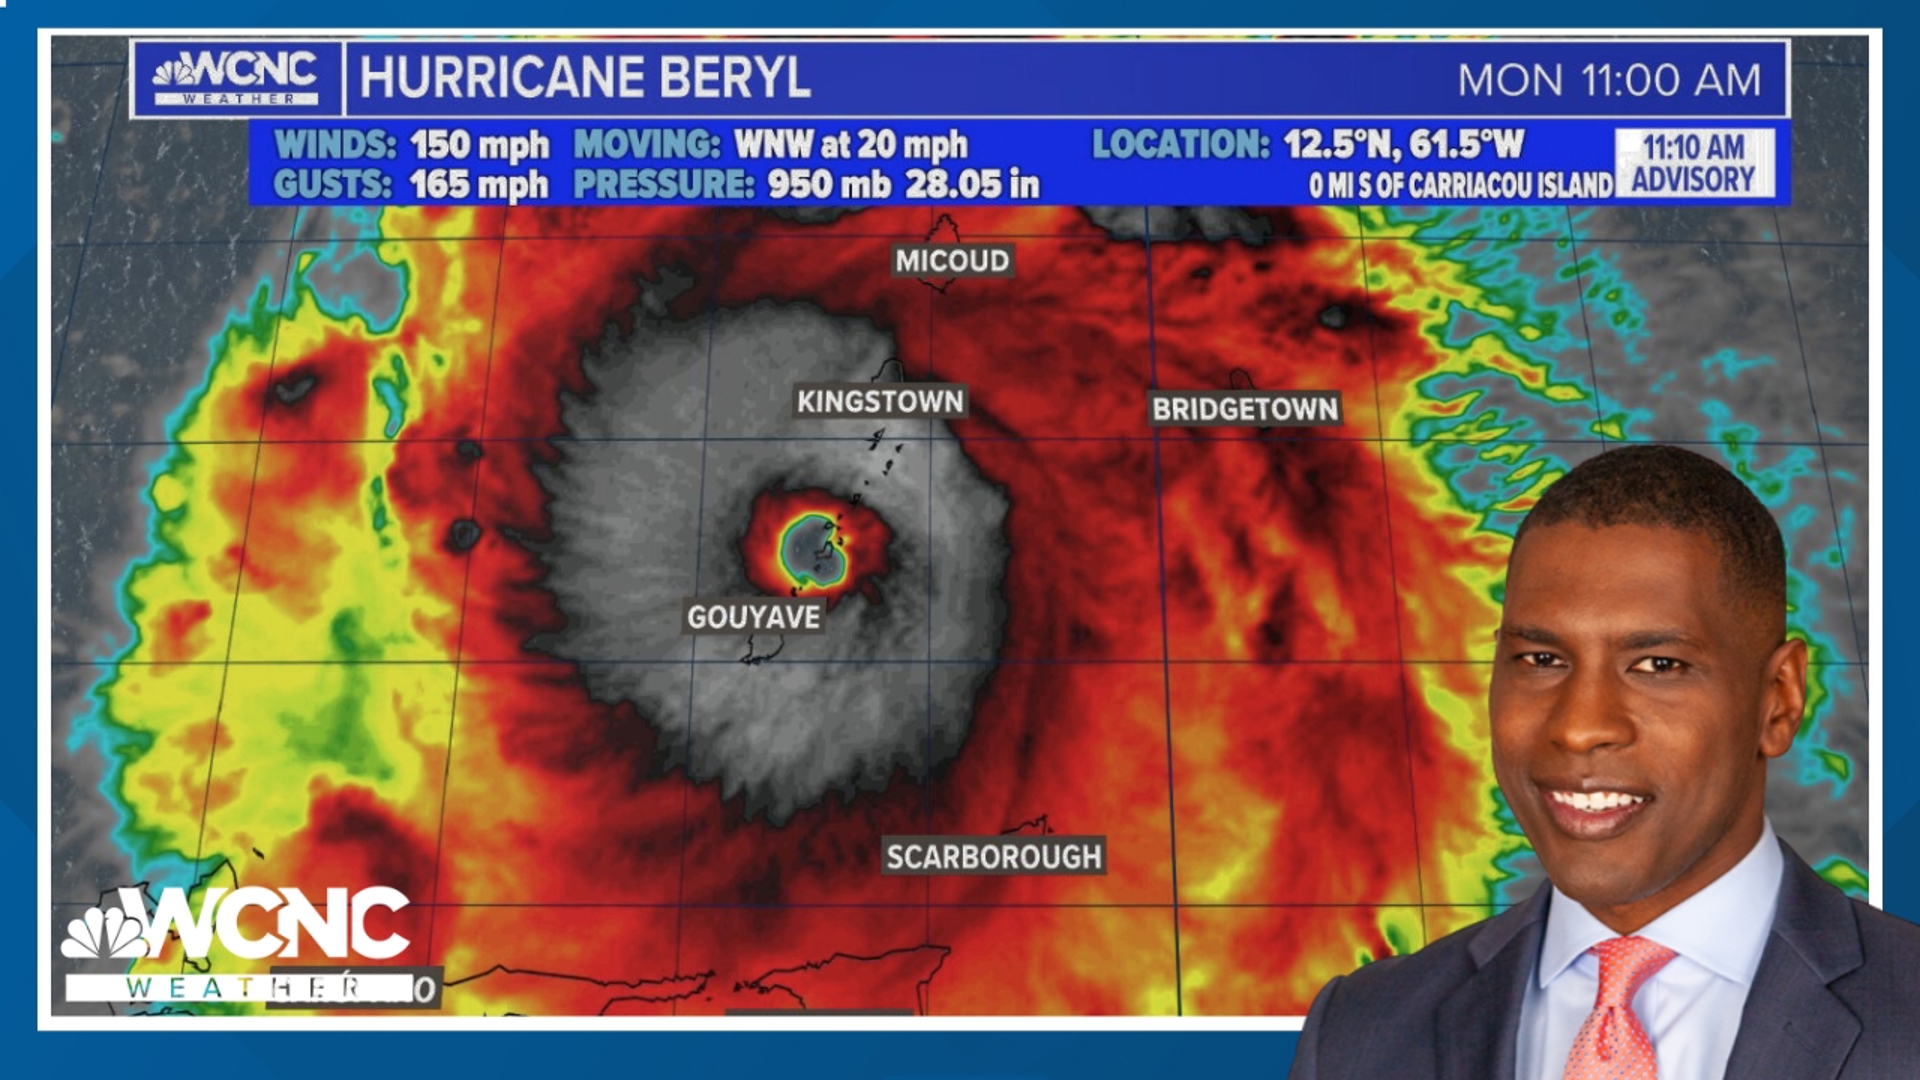 Hurricane Beryl has officially made landfall as an extremely dangerous category 4 storm.